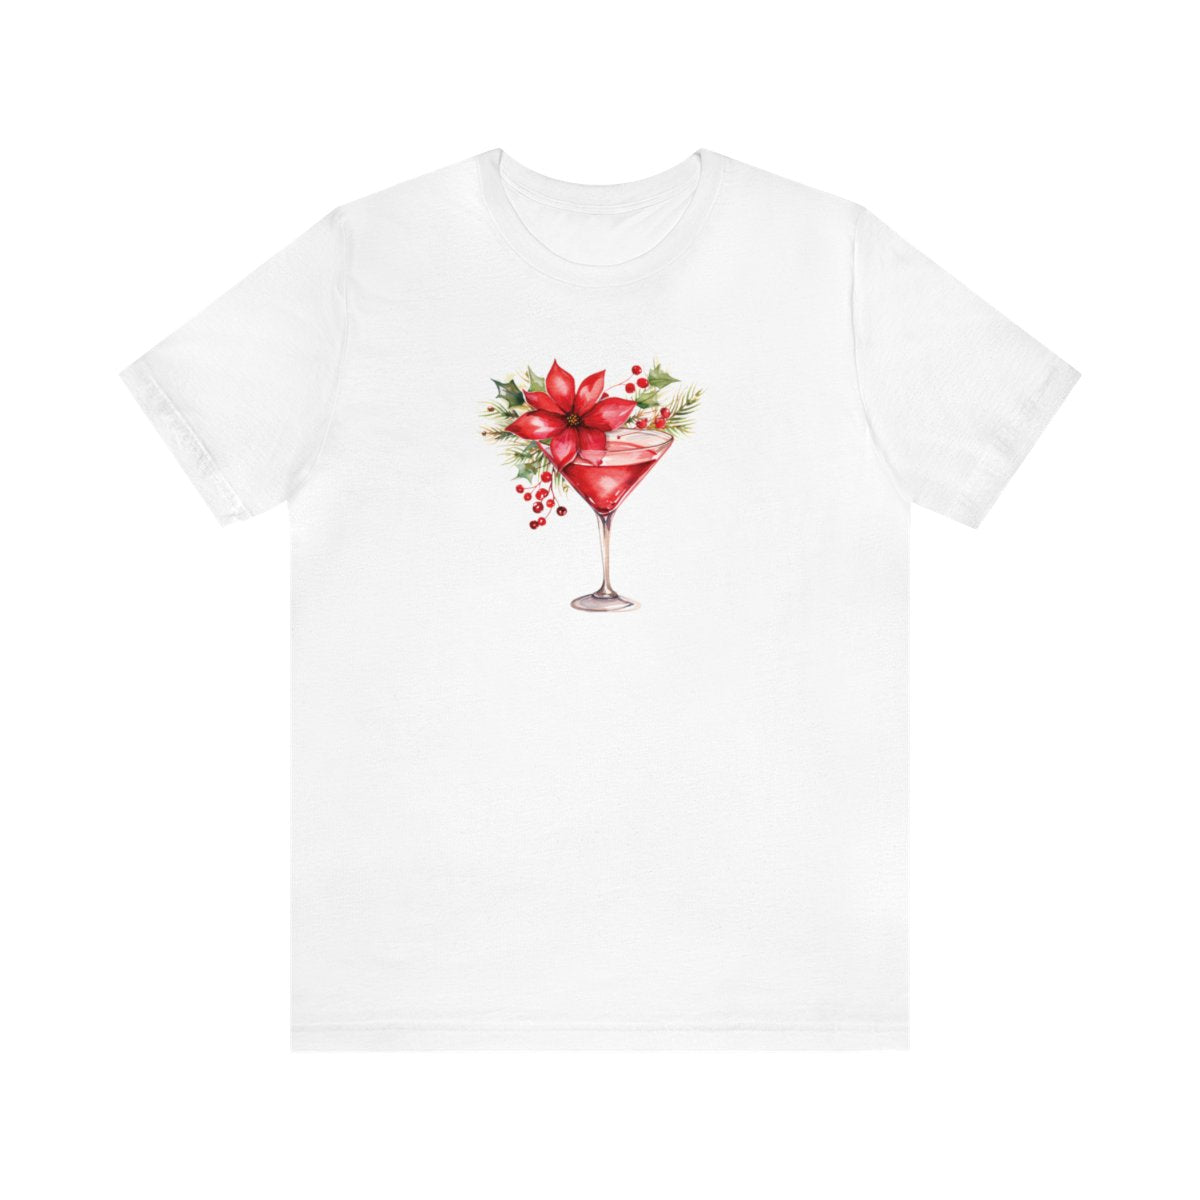 Christmas Cocktail T-shirt, Red Poinsettia